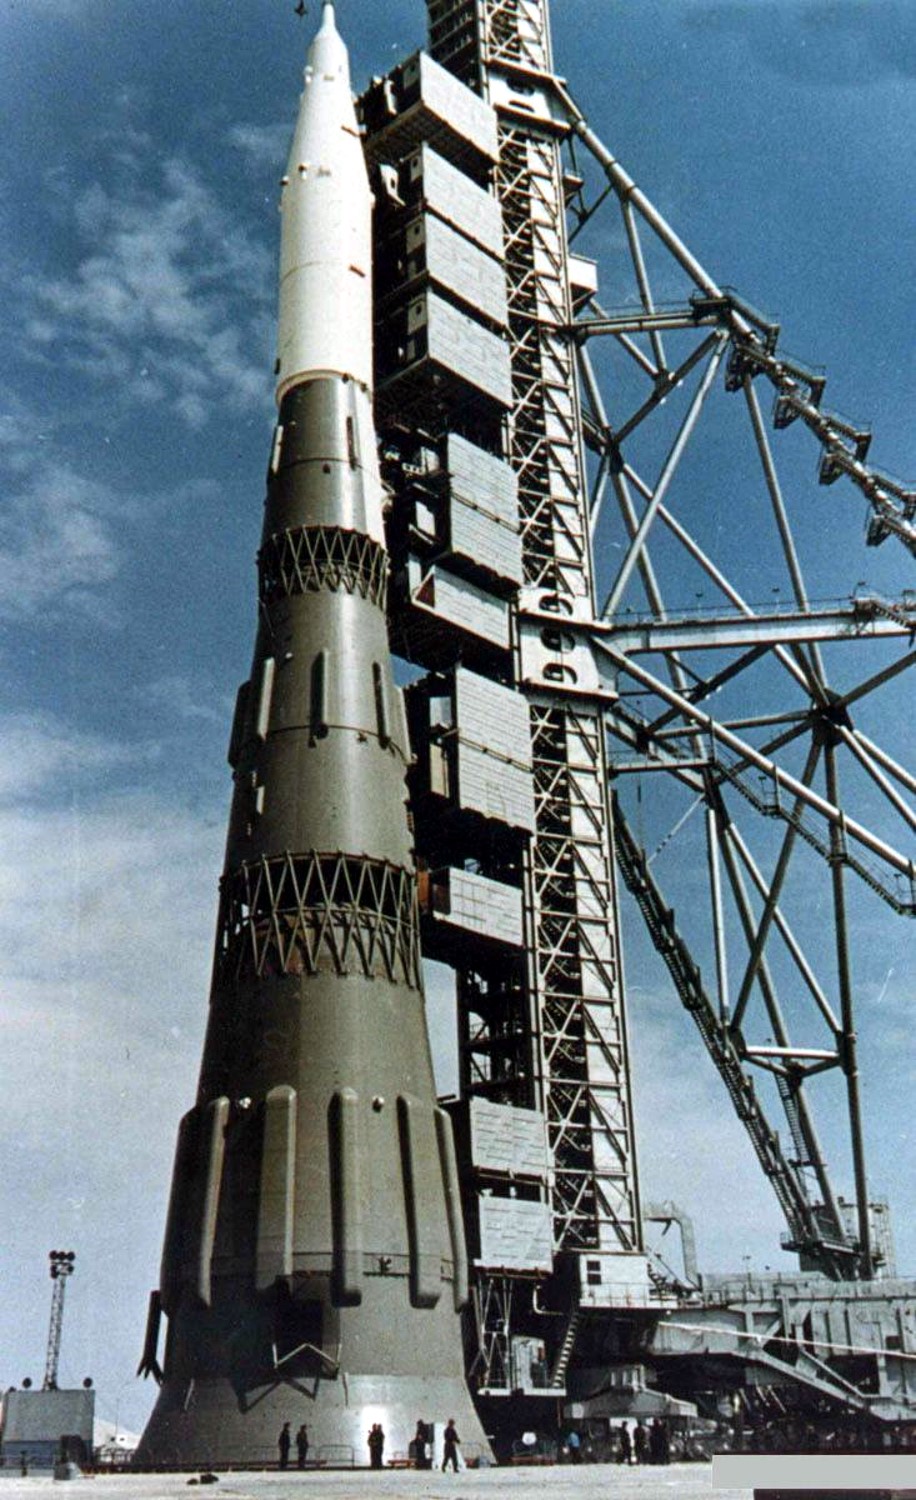 N1 1M1 mockup on the launch pad at the Baikonur Cosmodrome in late 1967.